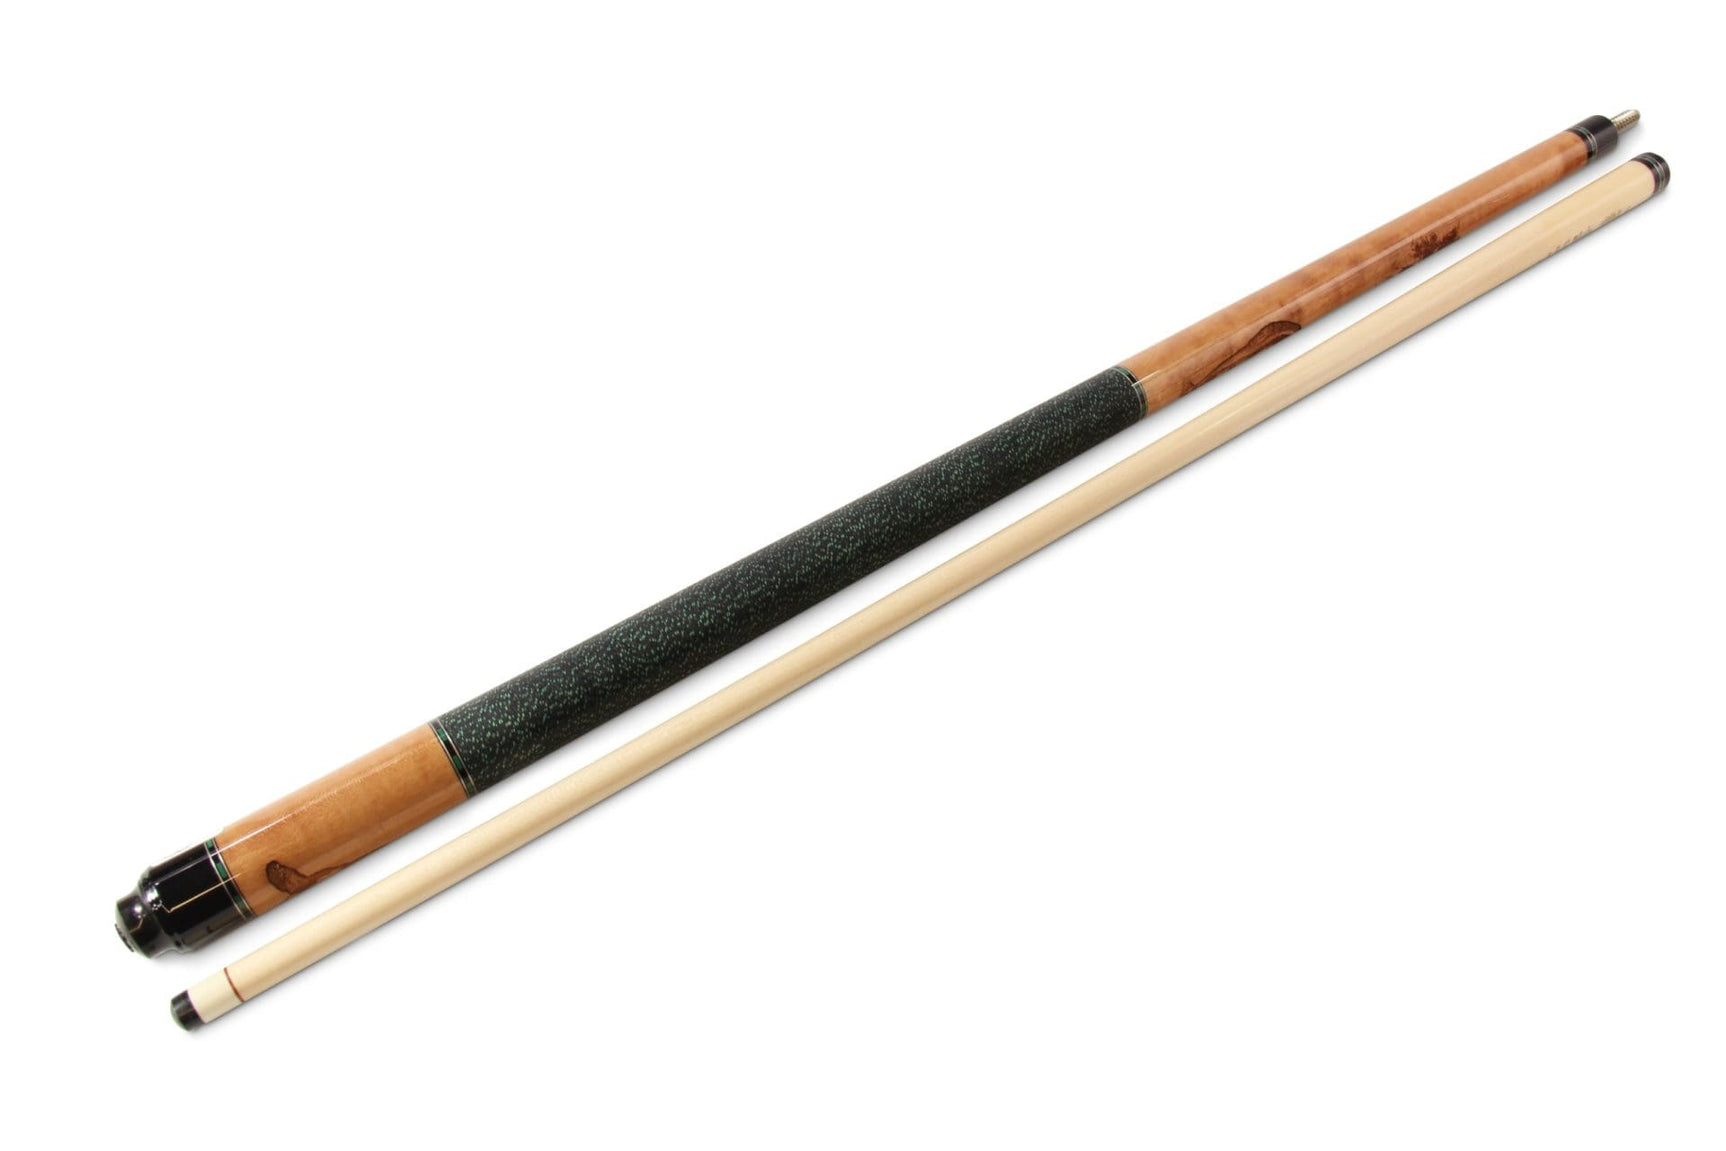 McDermott GREAT WOLF Hand Crafted G-Series American Pool Cue 13mm tip –G338